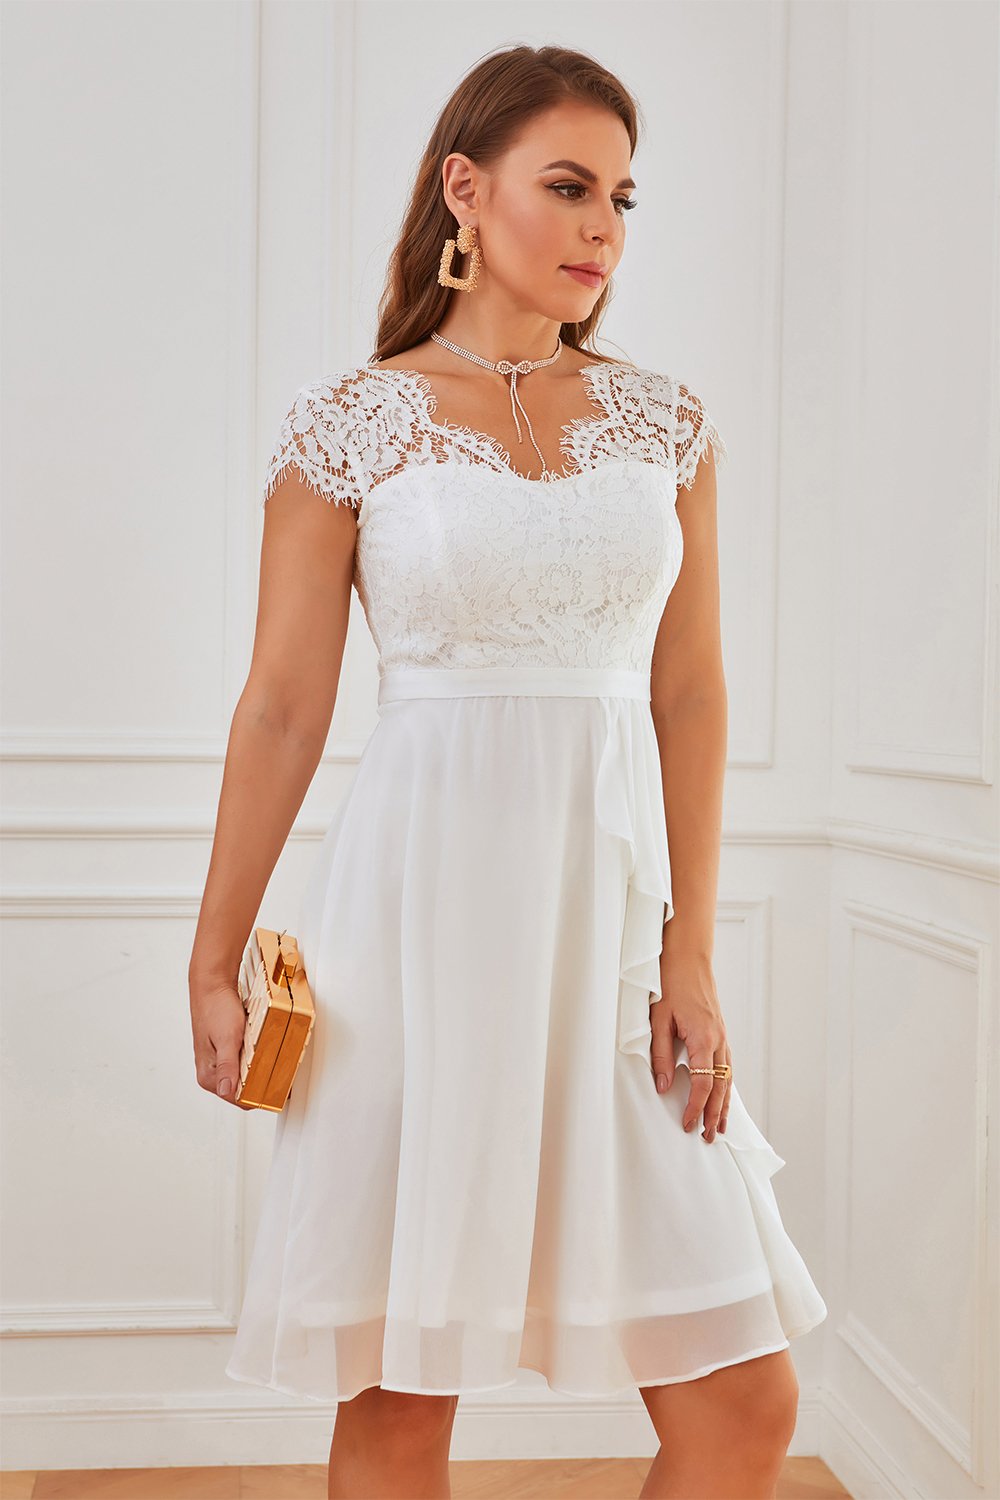 White Lace Party Dress with Ruffles